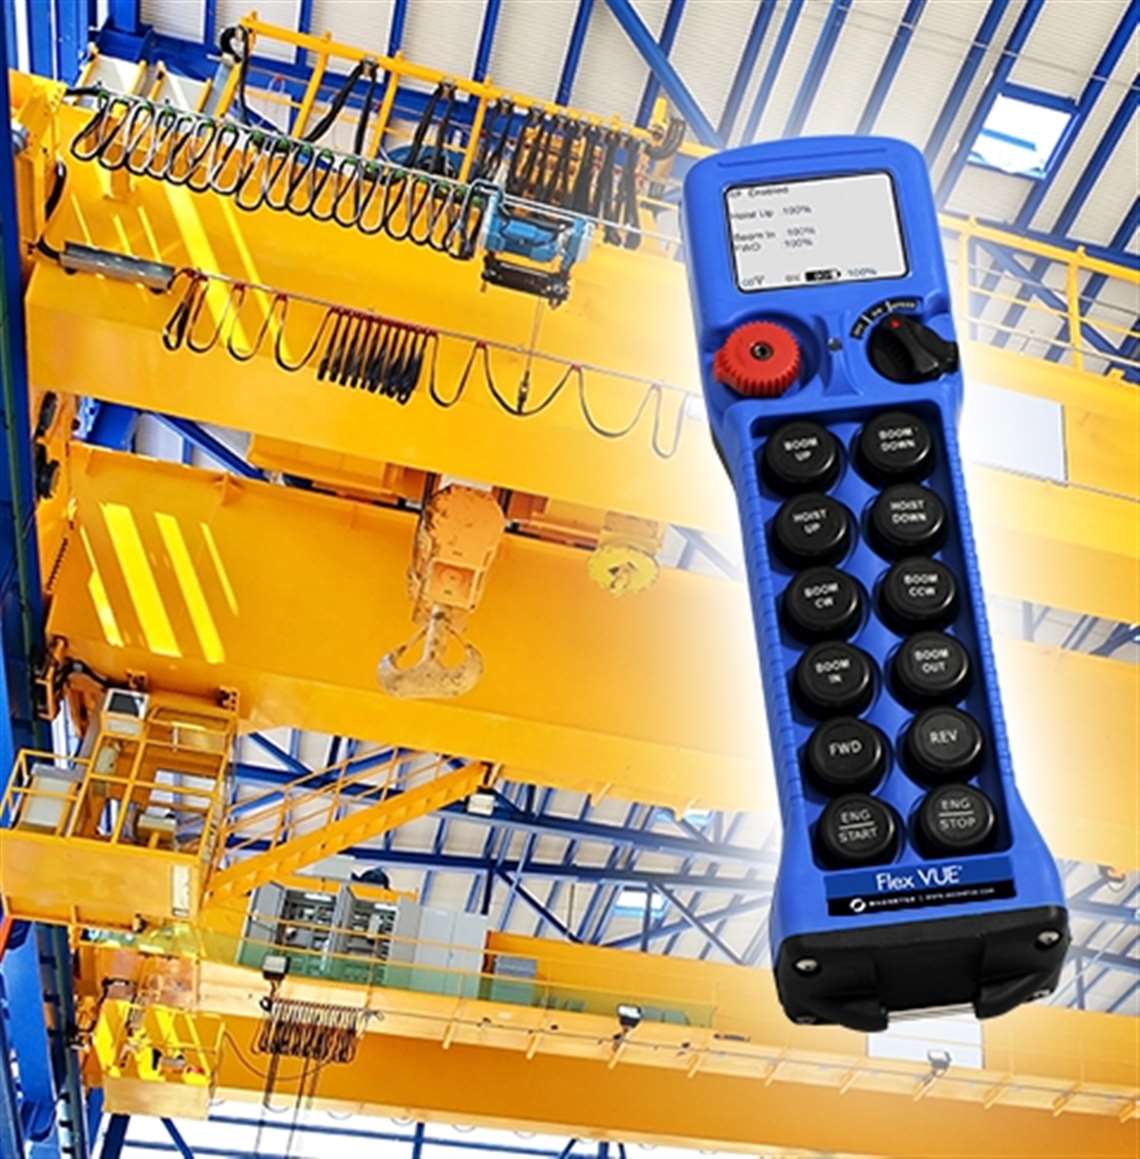 Magnetek’s blue pendant style tandem crane radio remote control system is now available in EMEA